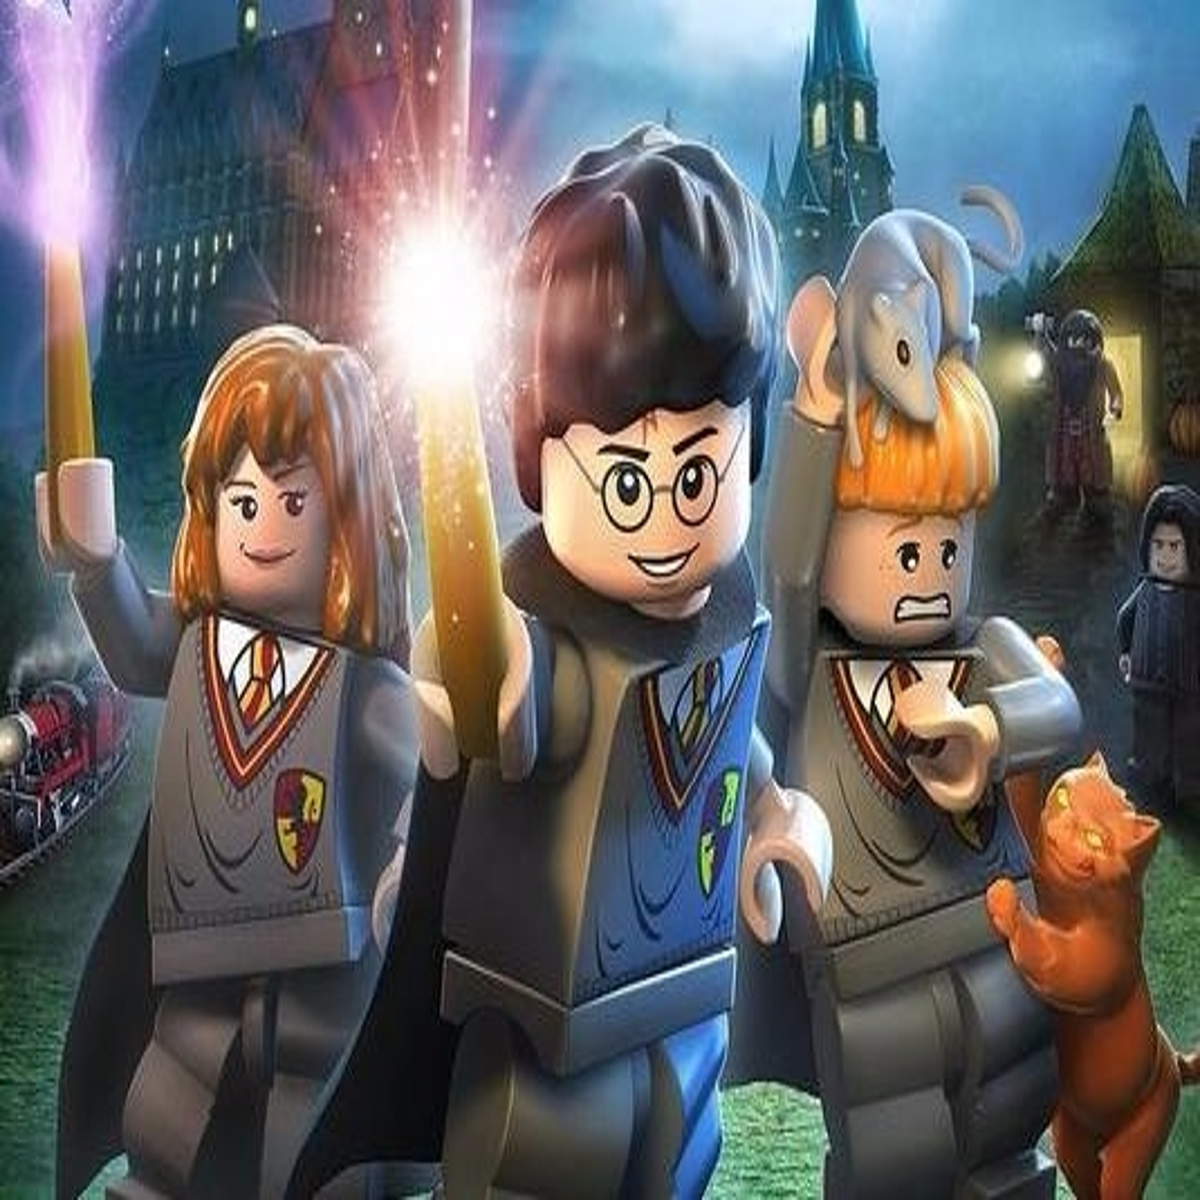 Xbox 360 Cheats - LEGO Harry Potter Guide - IGN